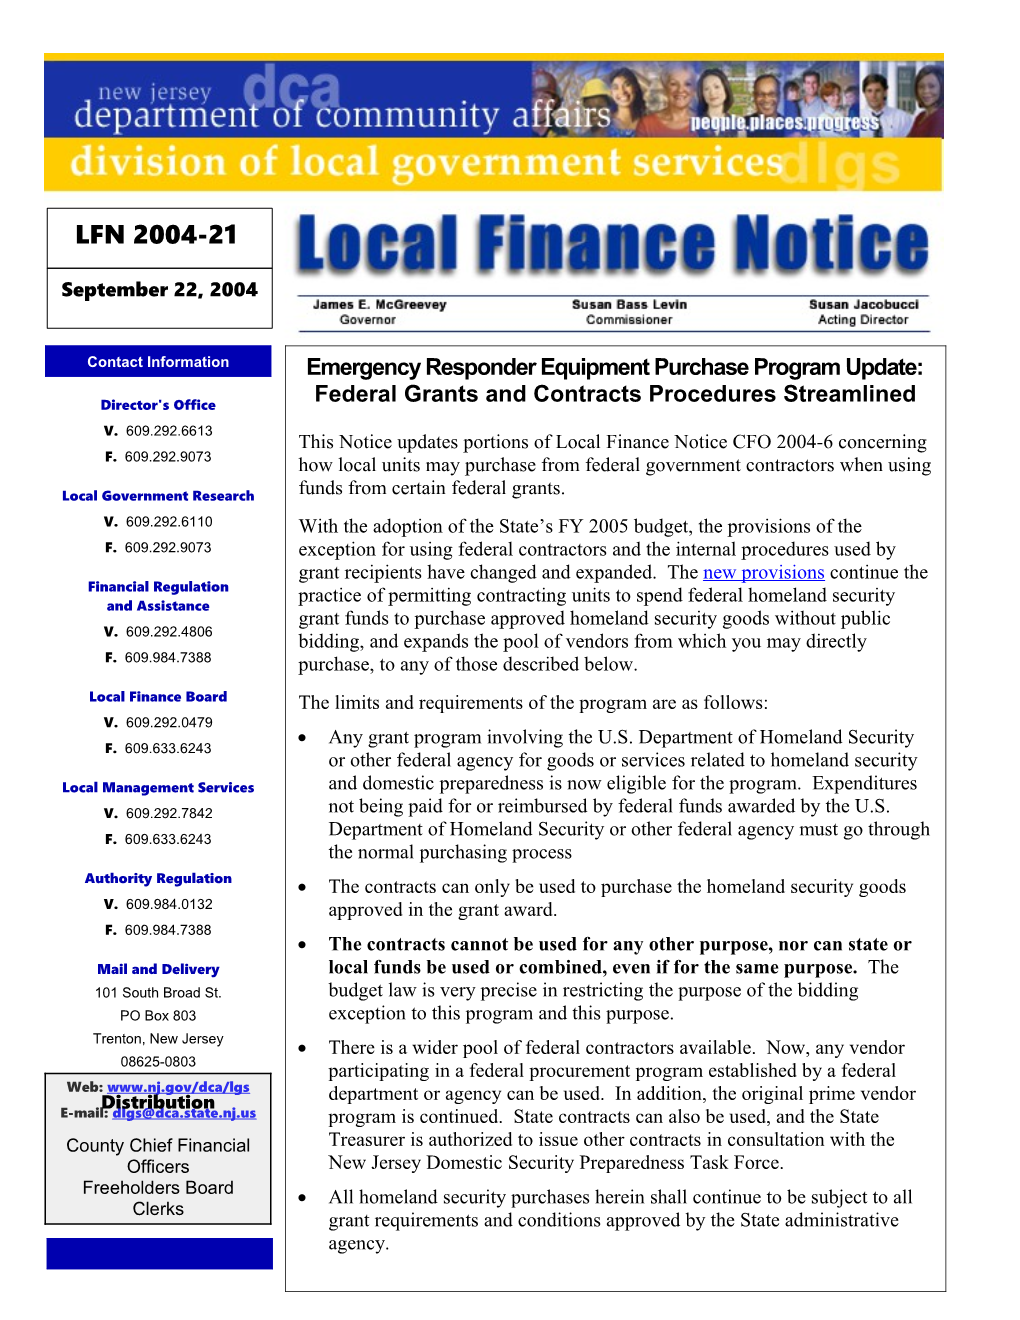 Local Finance Notice 2004-20September 1, 2004Page 2